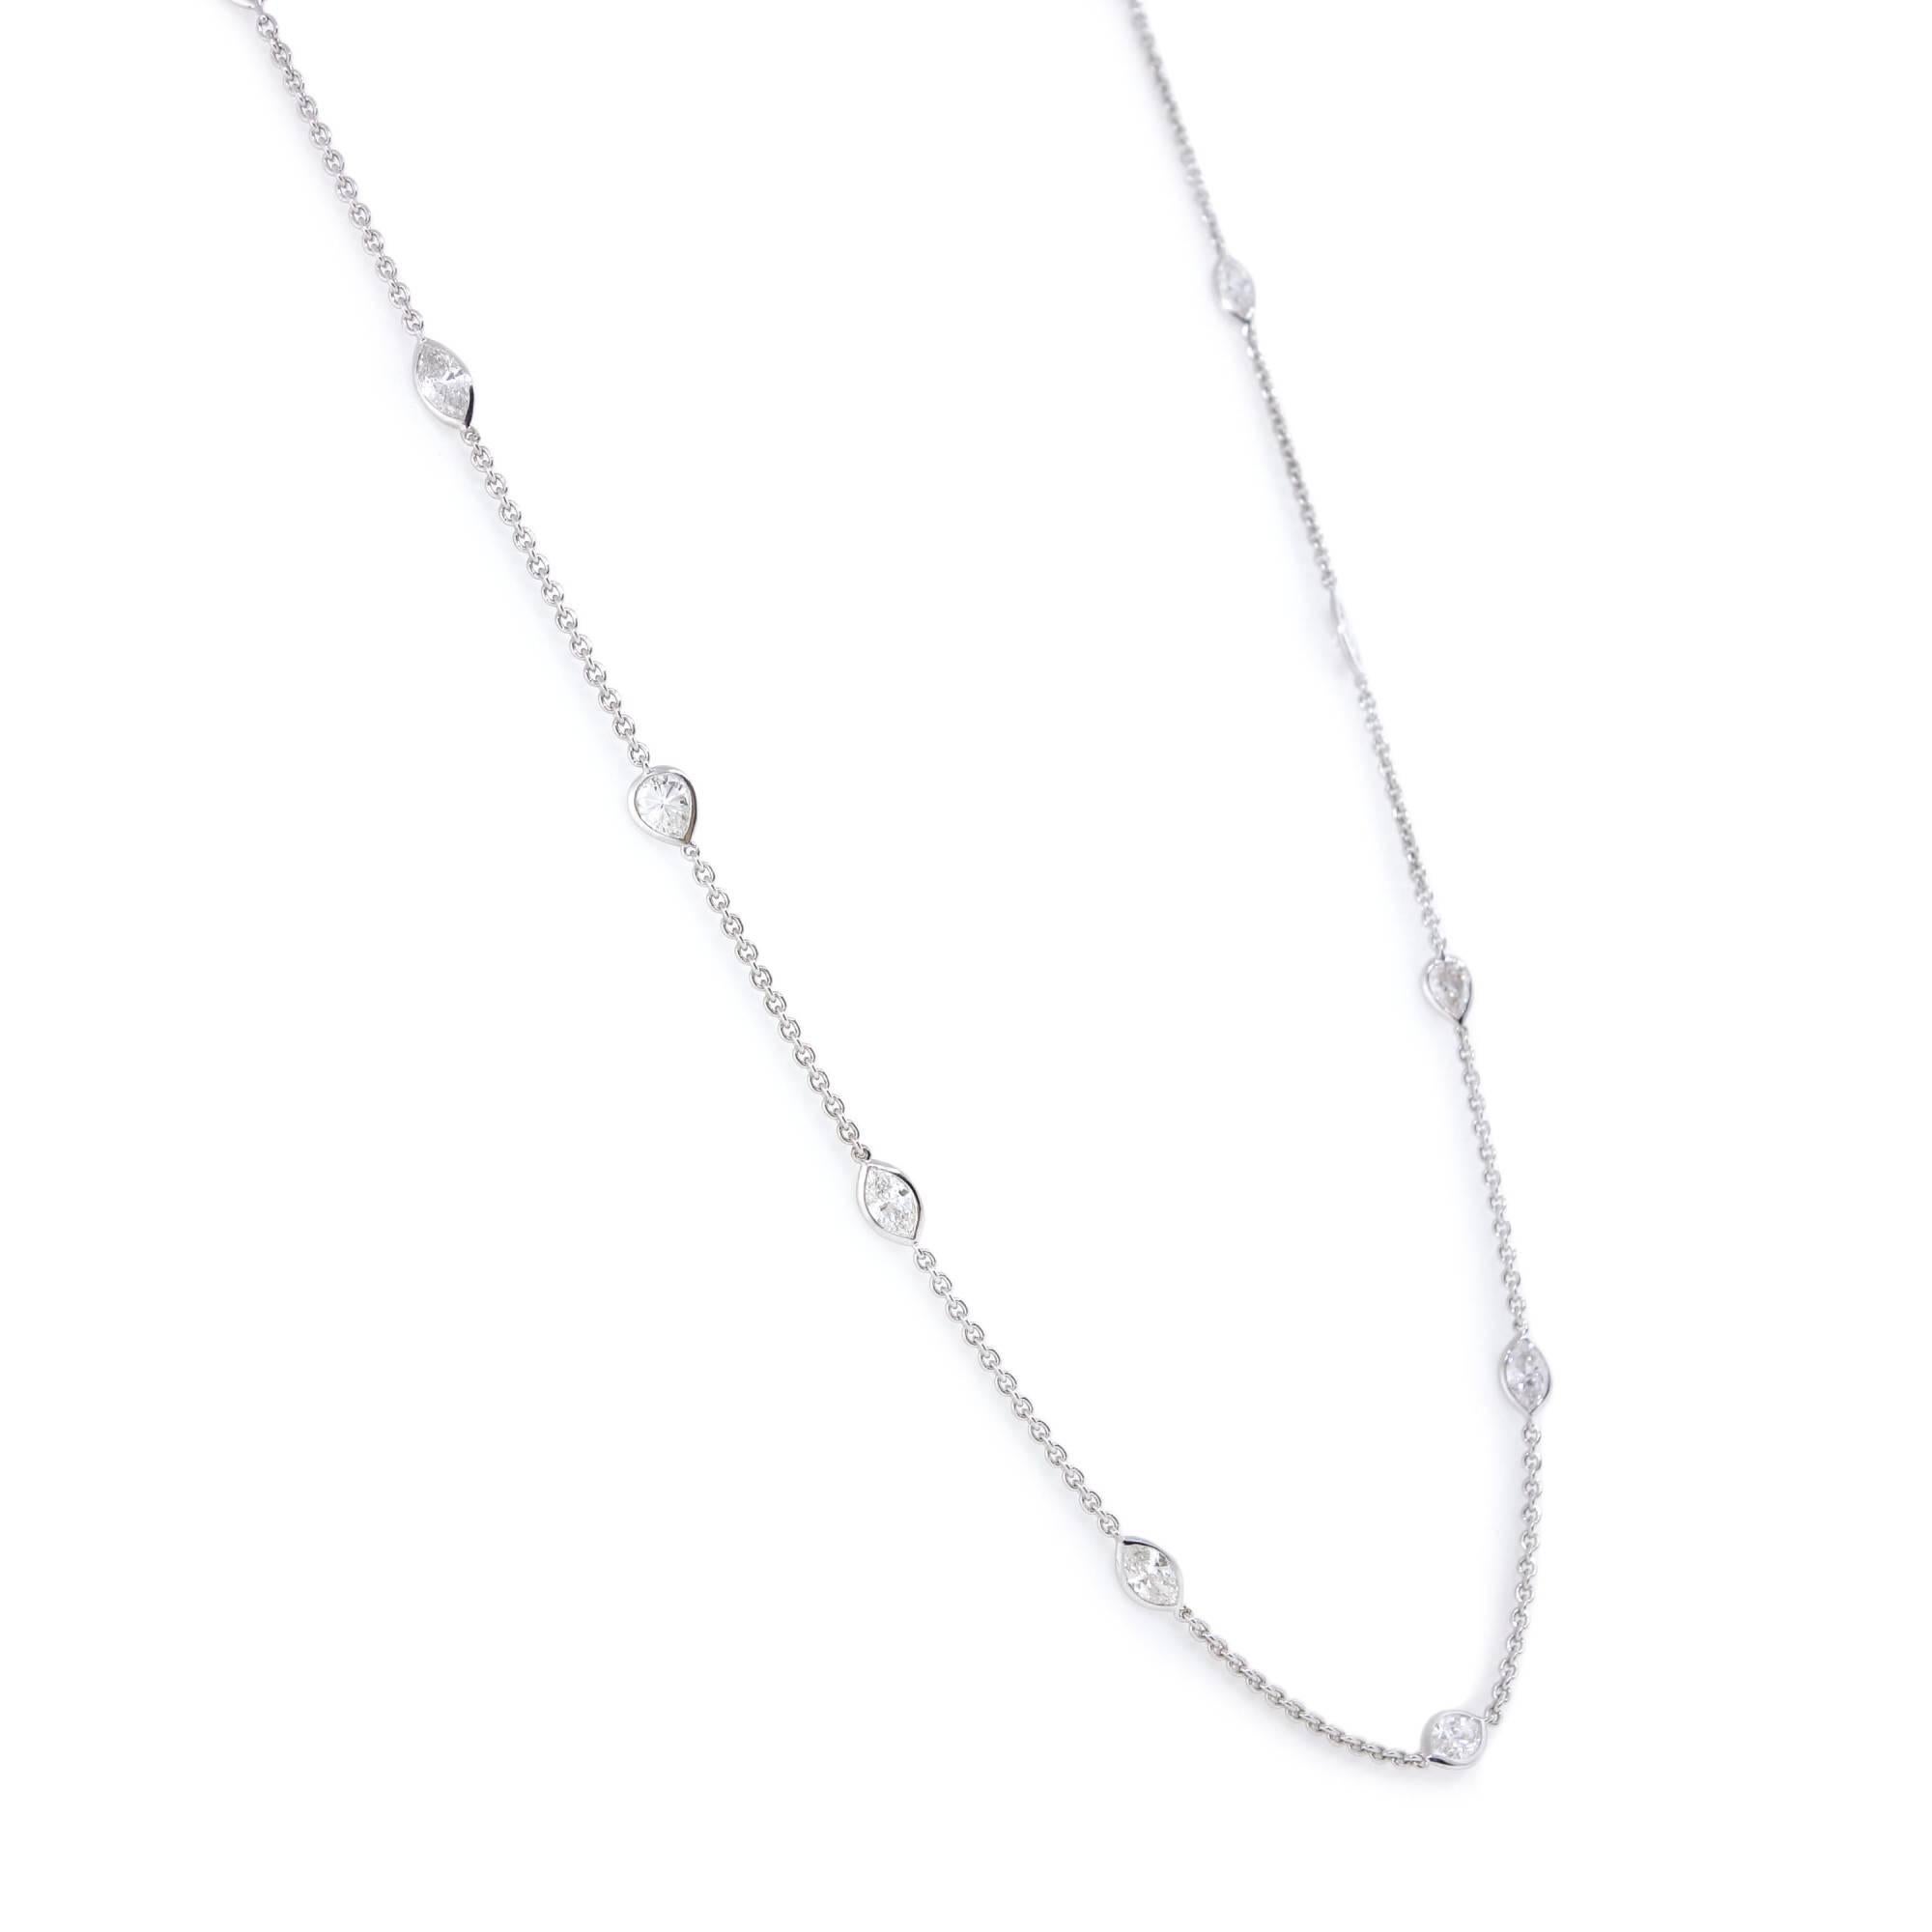 Diamond by the Yard Necklace containing 20 marquise and pear shape Diamonds of about 4.77 carats with a clarity of SI and color G. All stones are set in 18k white gold. The total weight of the necklace is approximately 7.98 grams.

Measurements: (L)